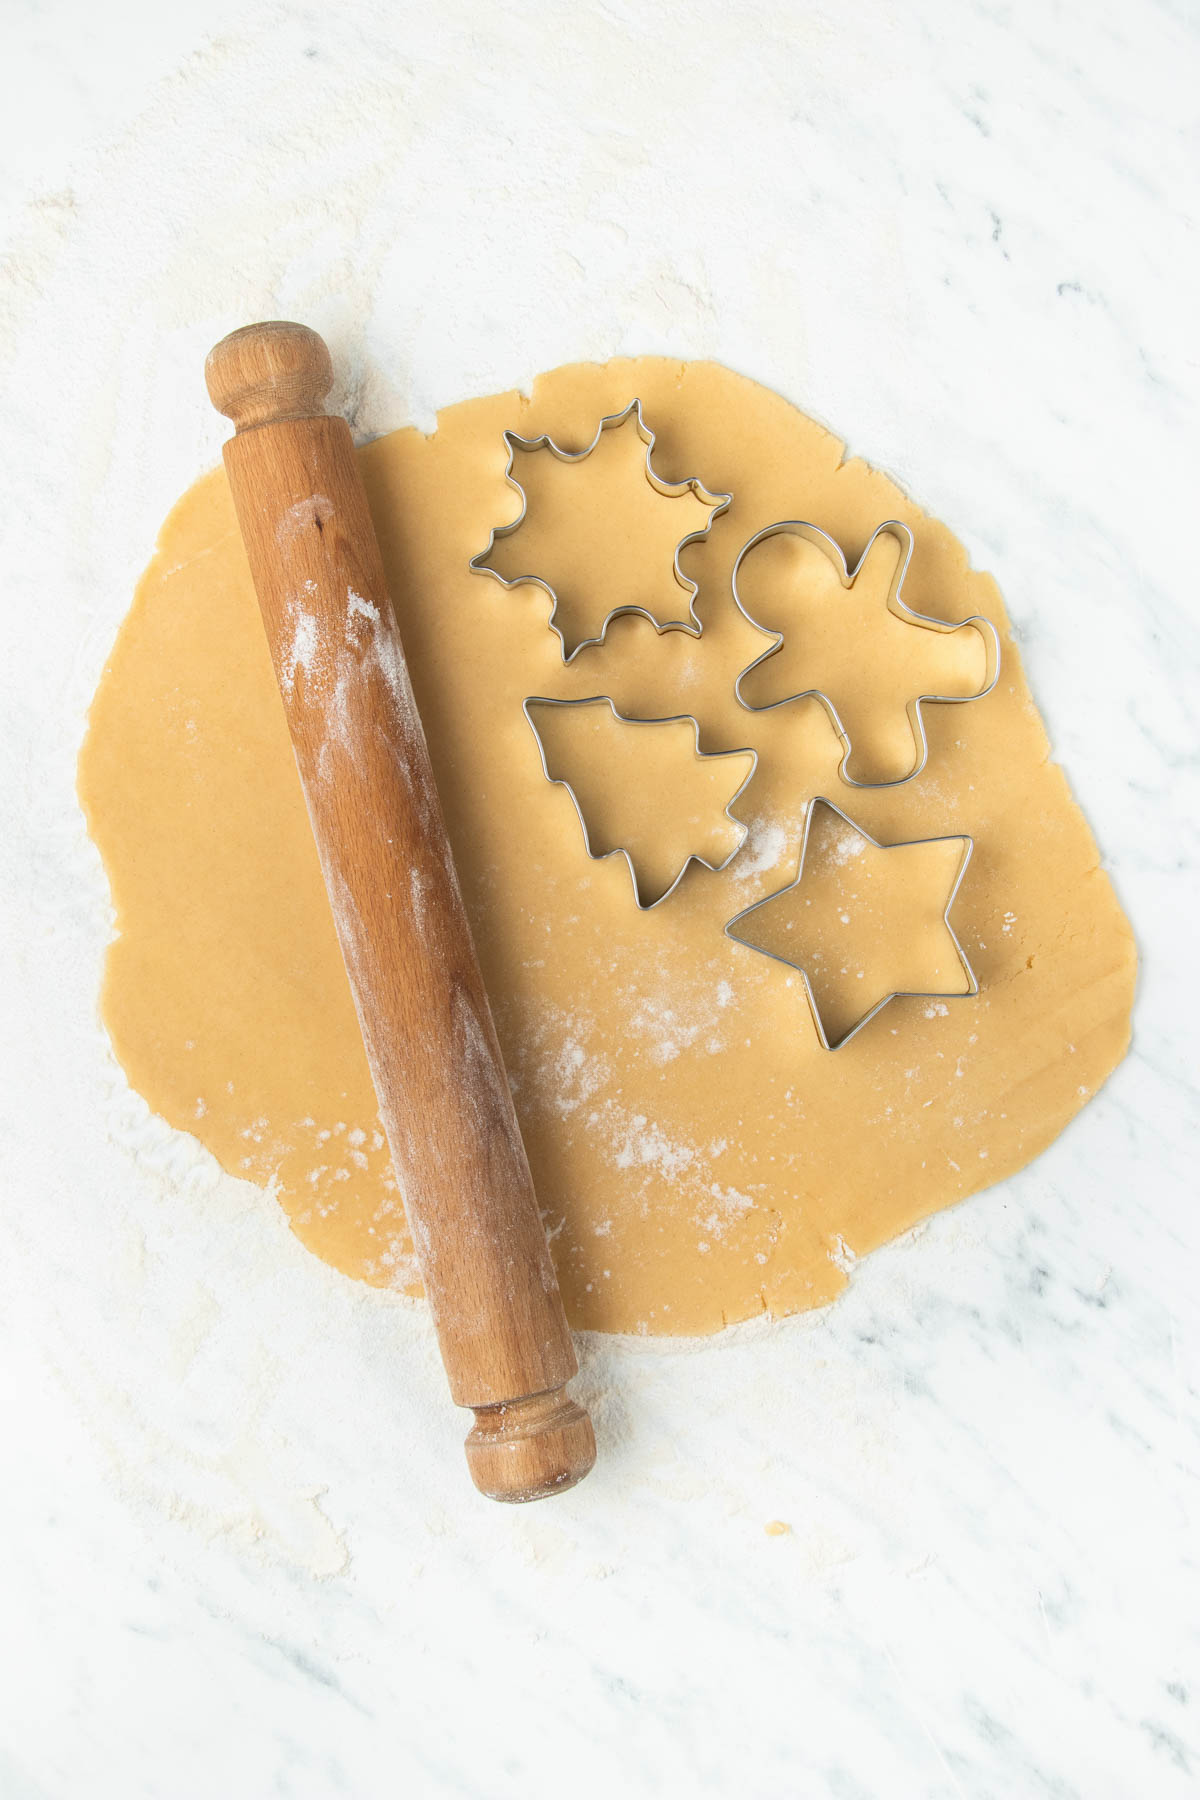 Gingerbread cookie cutter and rolling pin on a marble countertop.